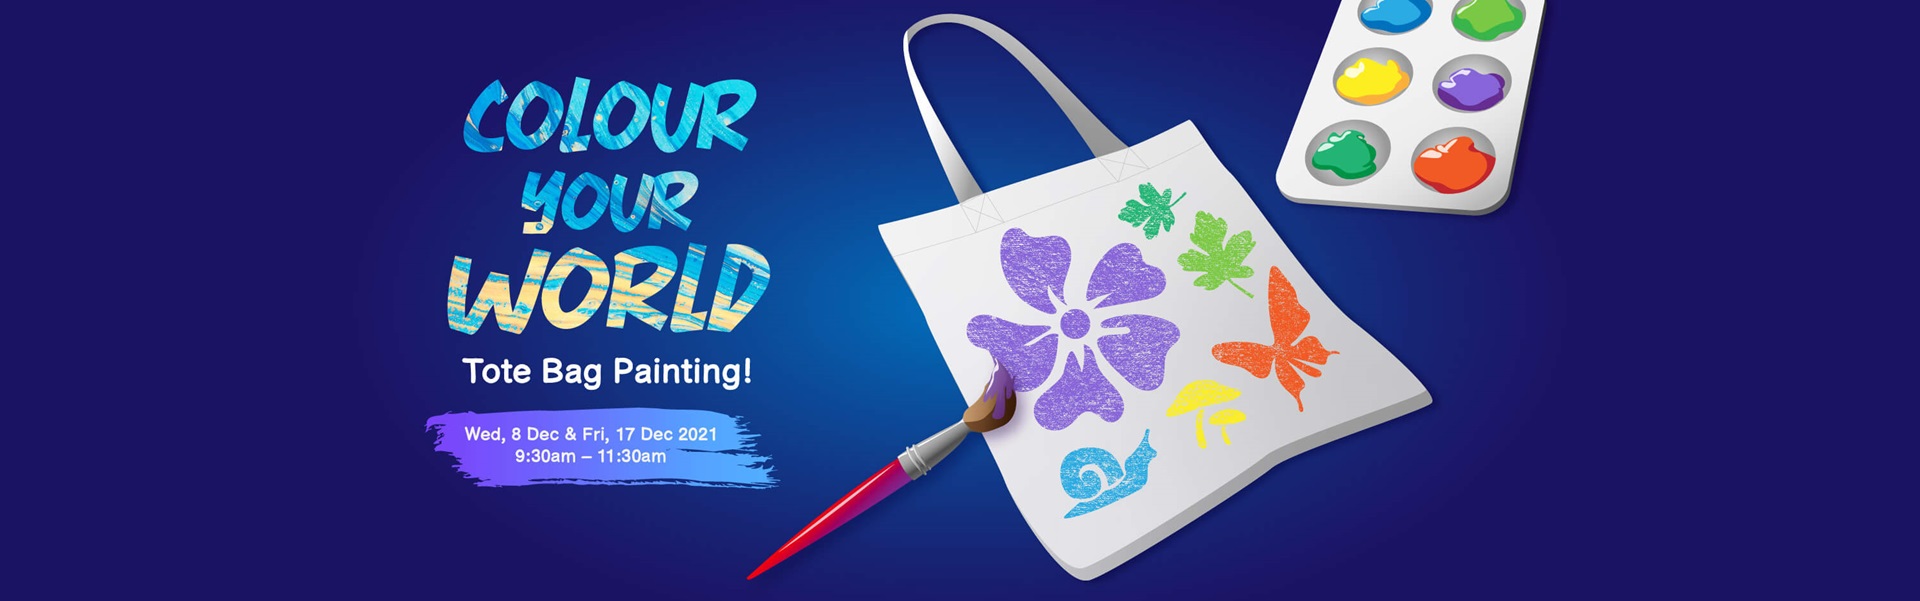 Colour Your World - Tote Bag Painting